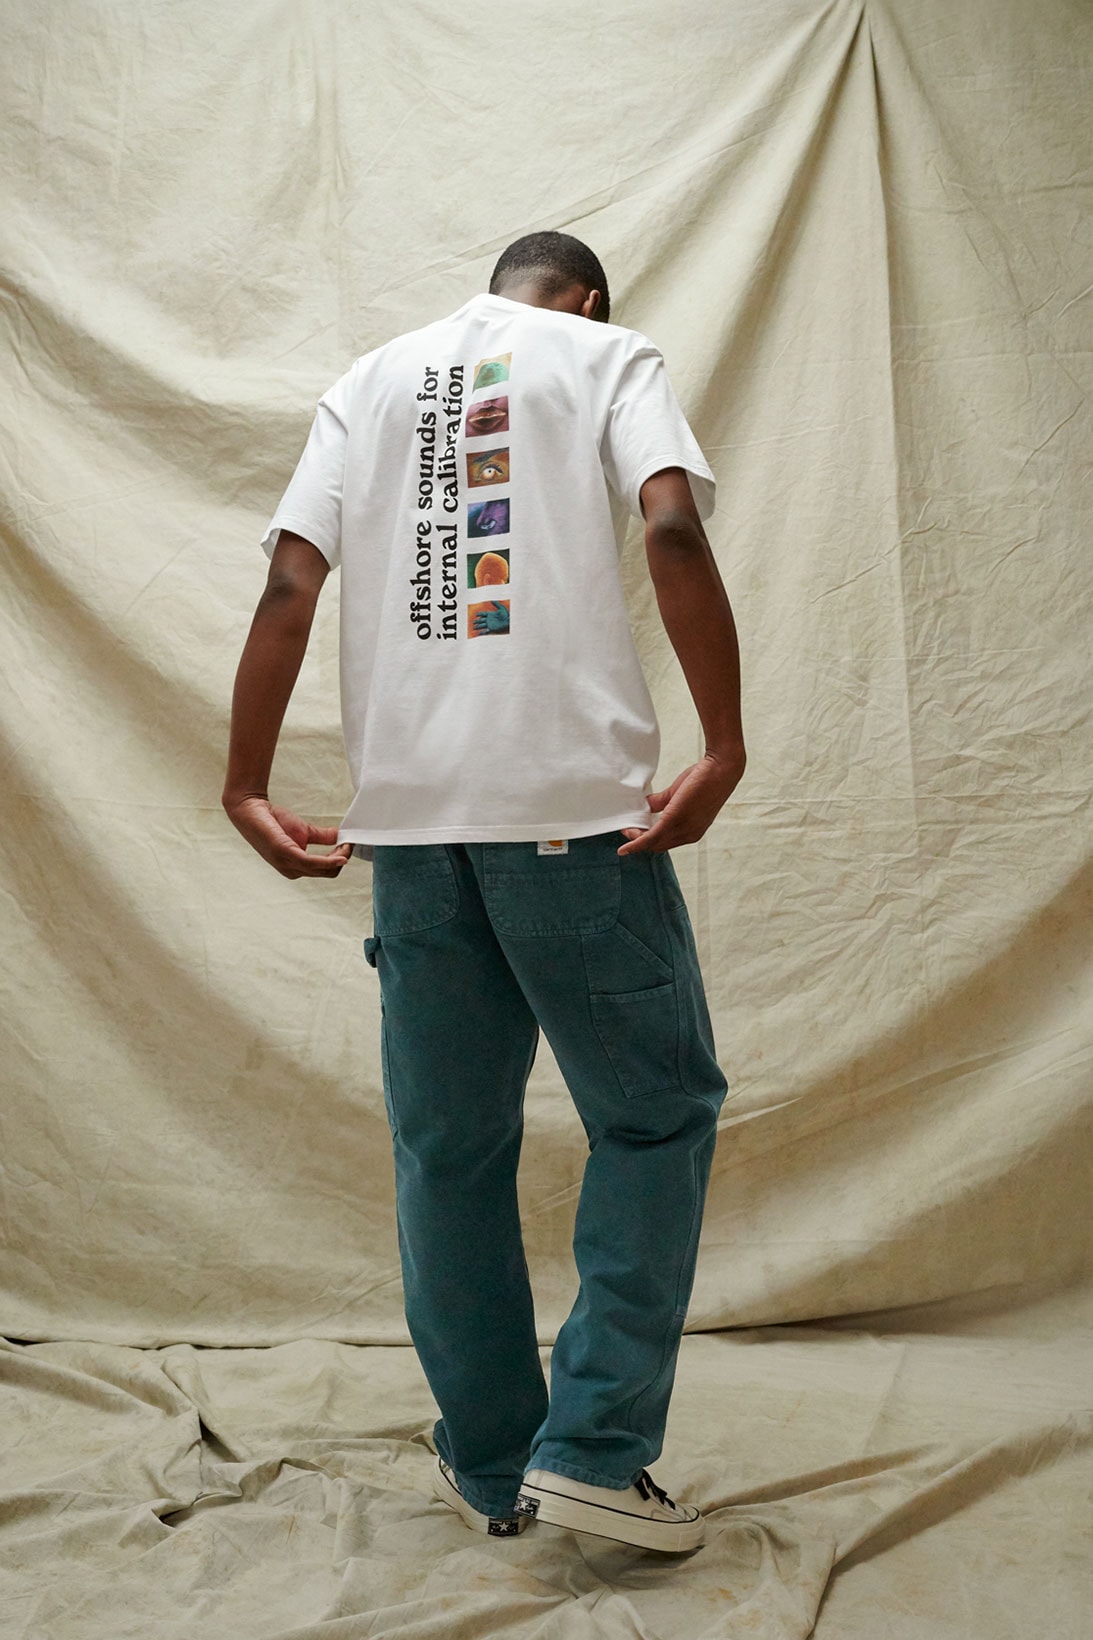 carhartt wip spring summer 2021 ss21 collection lookbook graphic t-shirt pants